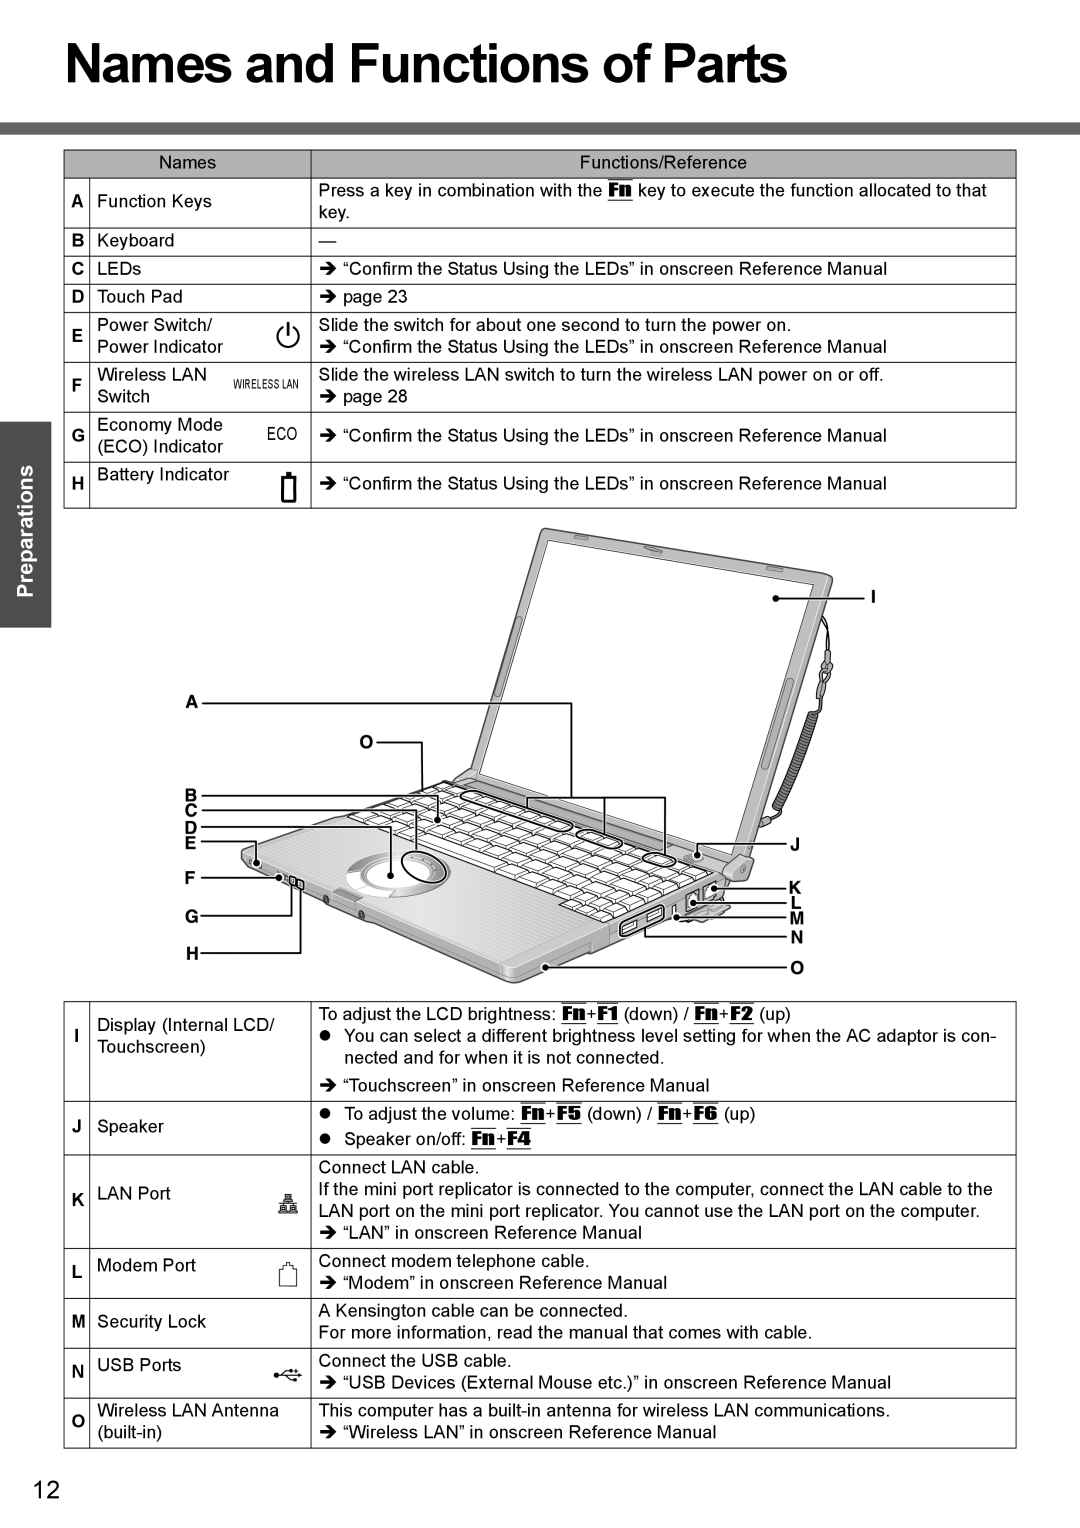 Panasonic CF-T4 operating instructions Names and Functions of Parts, Preparations 